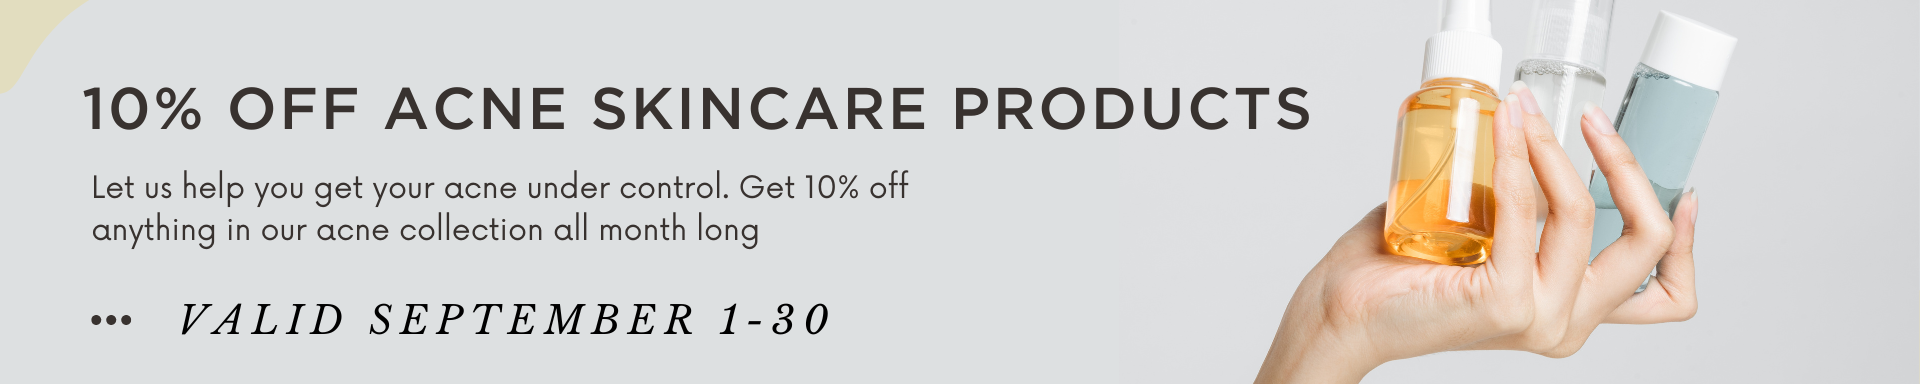 10% OFF ACNE SKINCARE PRODUCTS-1